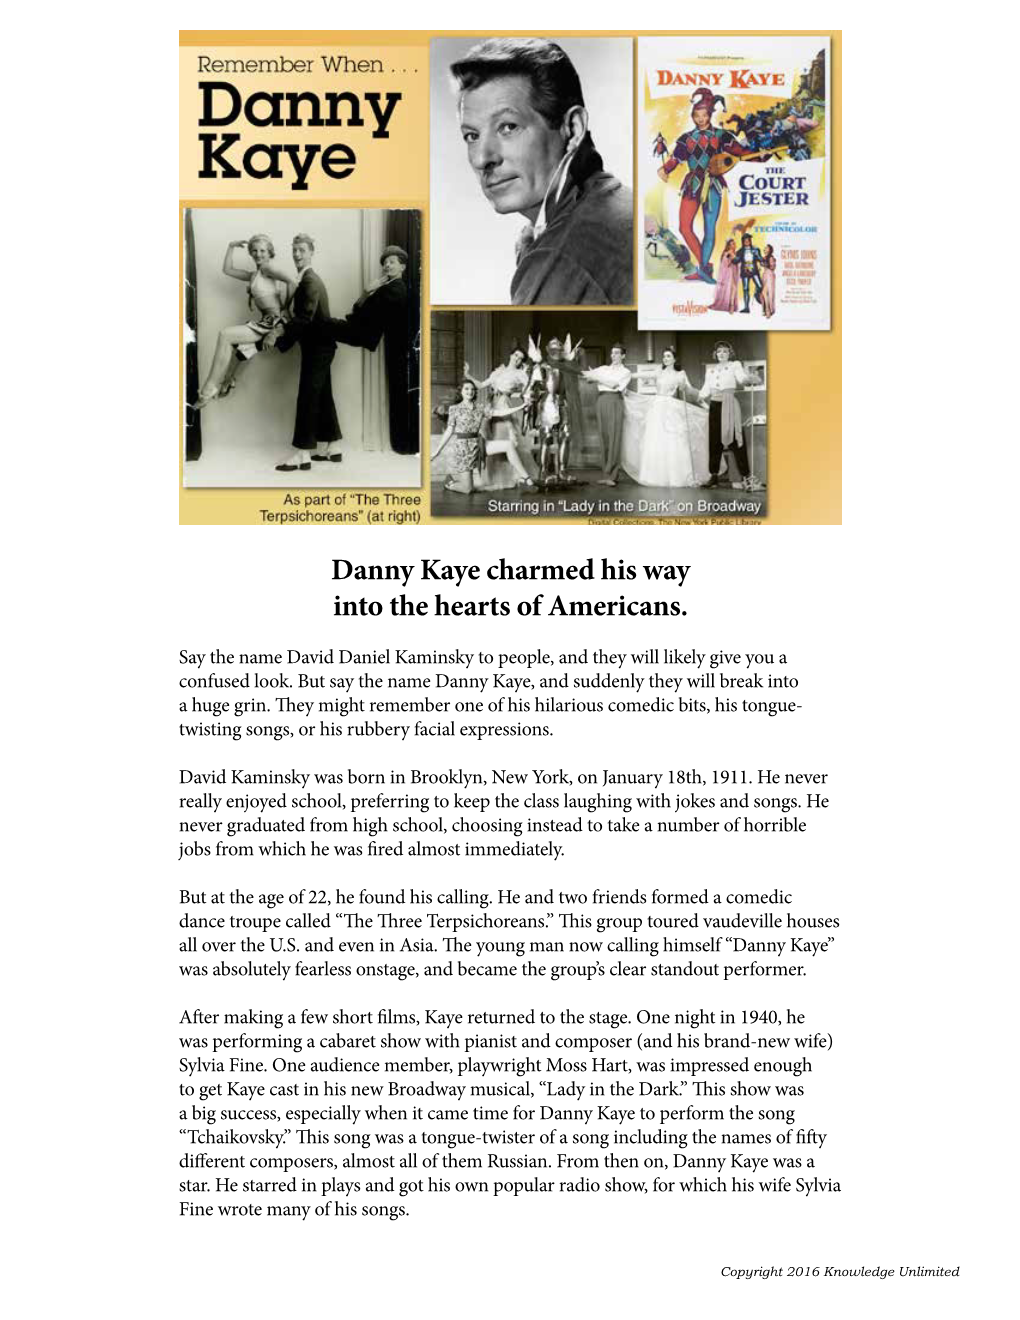 Danny Kaye Charmed His Way Into the Hearts of Americans